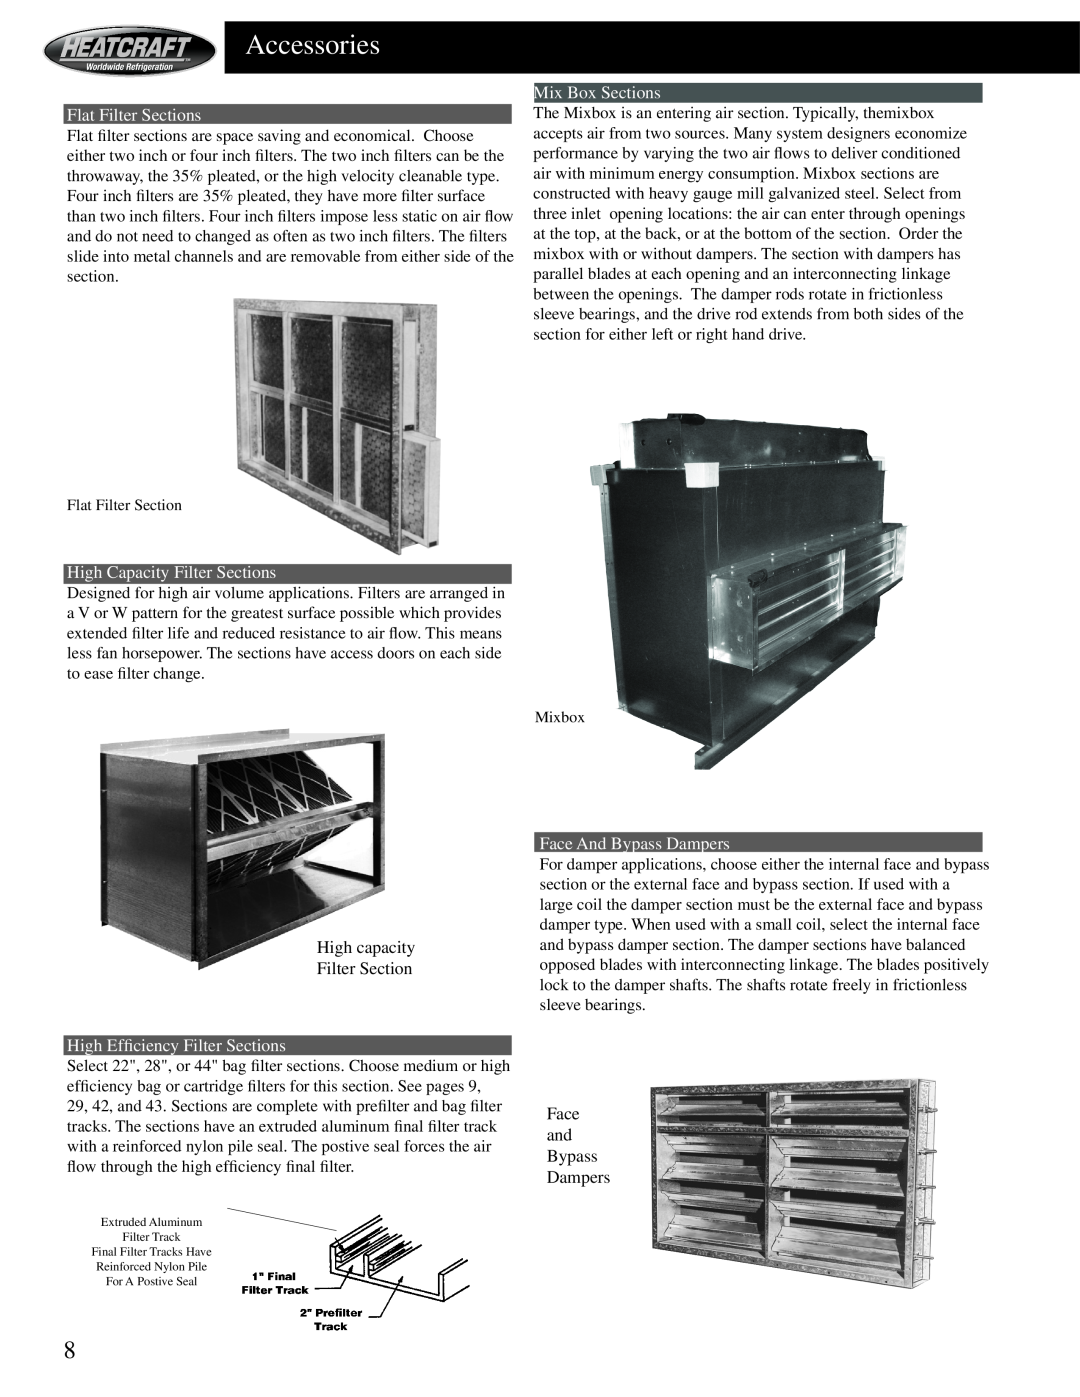 Heatcraft Refrigeration Products HCS Accessories, Flat Filter Sections, High Capacity Filter Sections, Mix Box Sections 